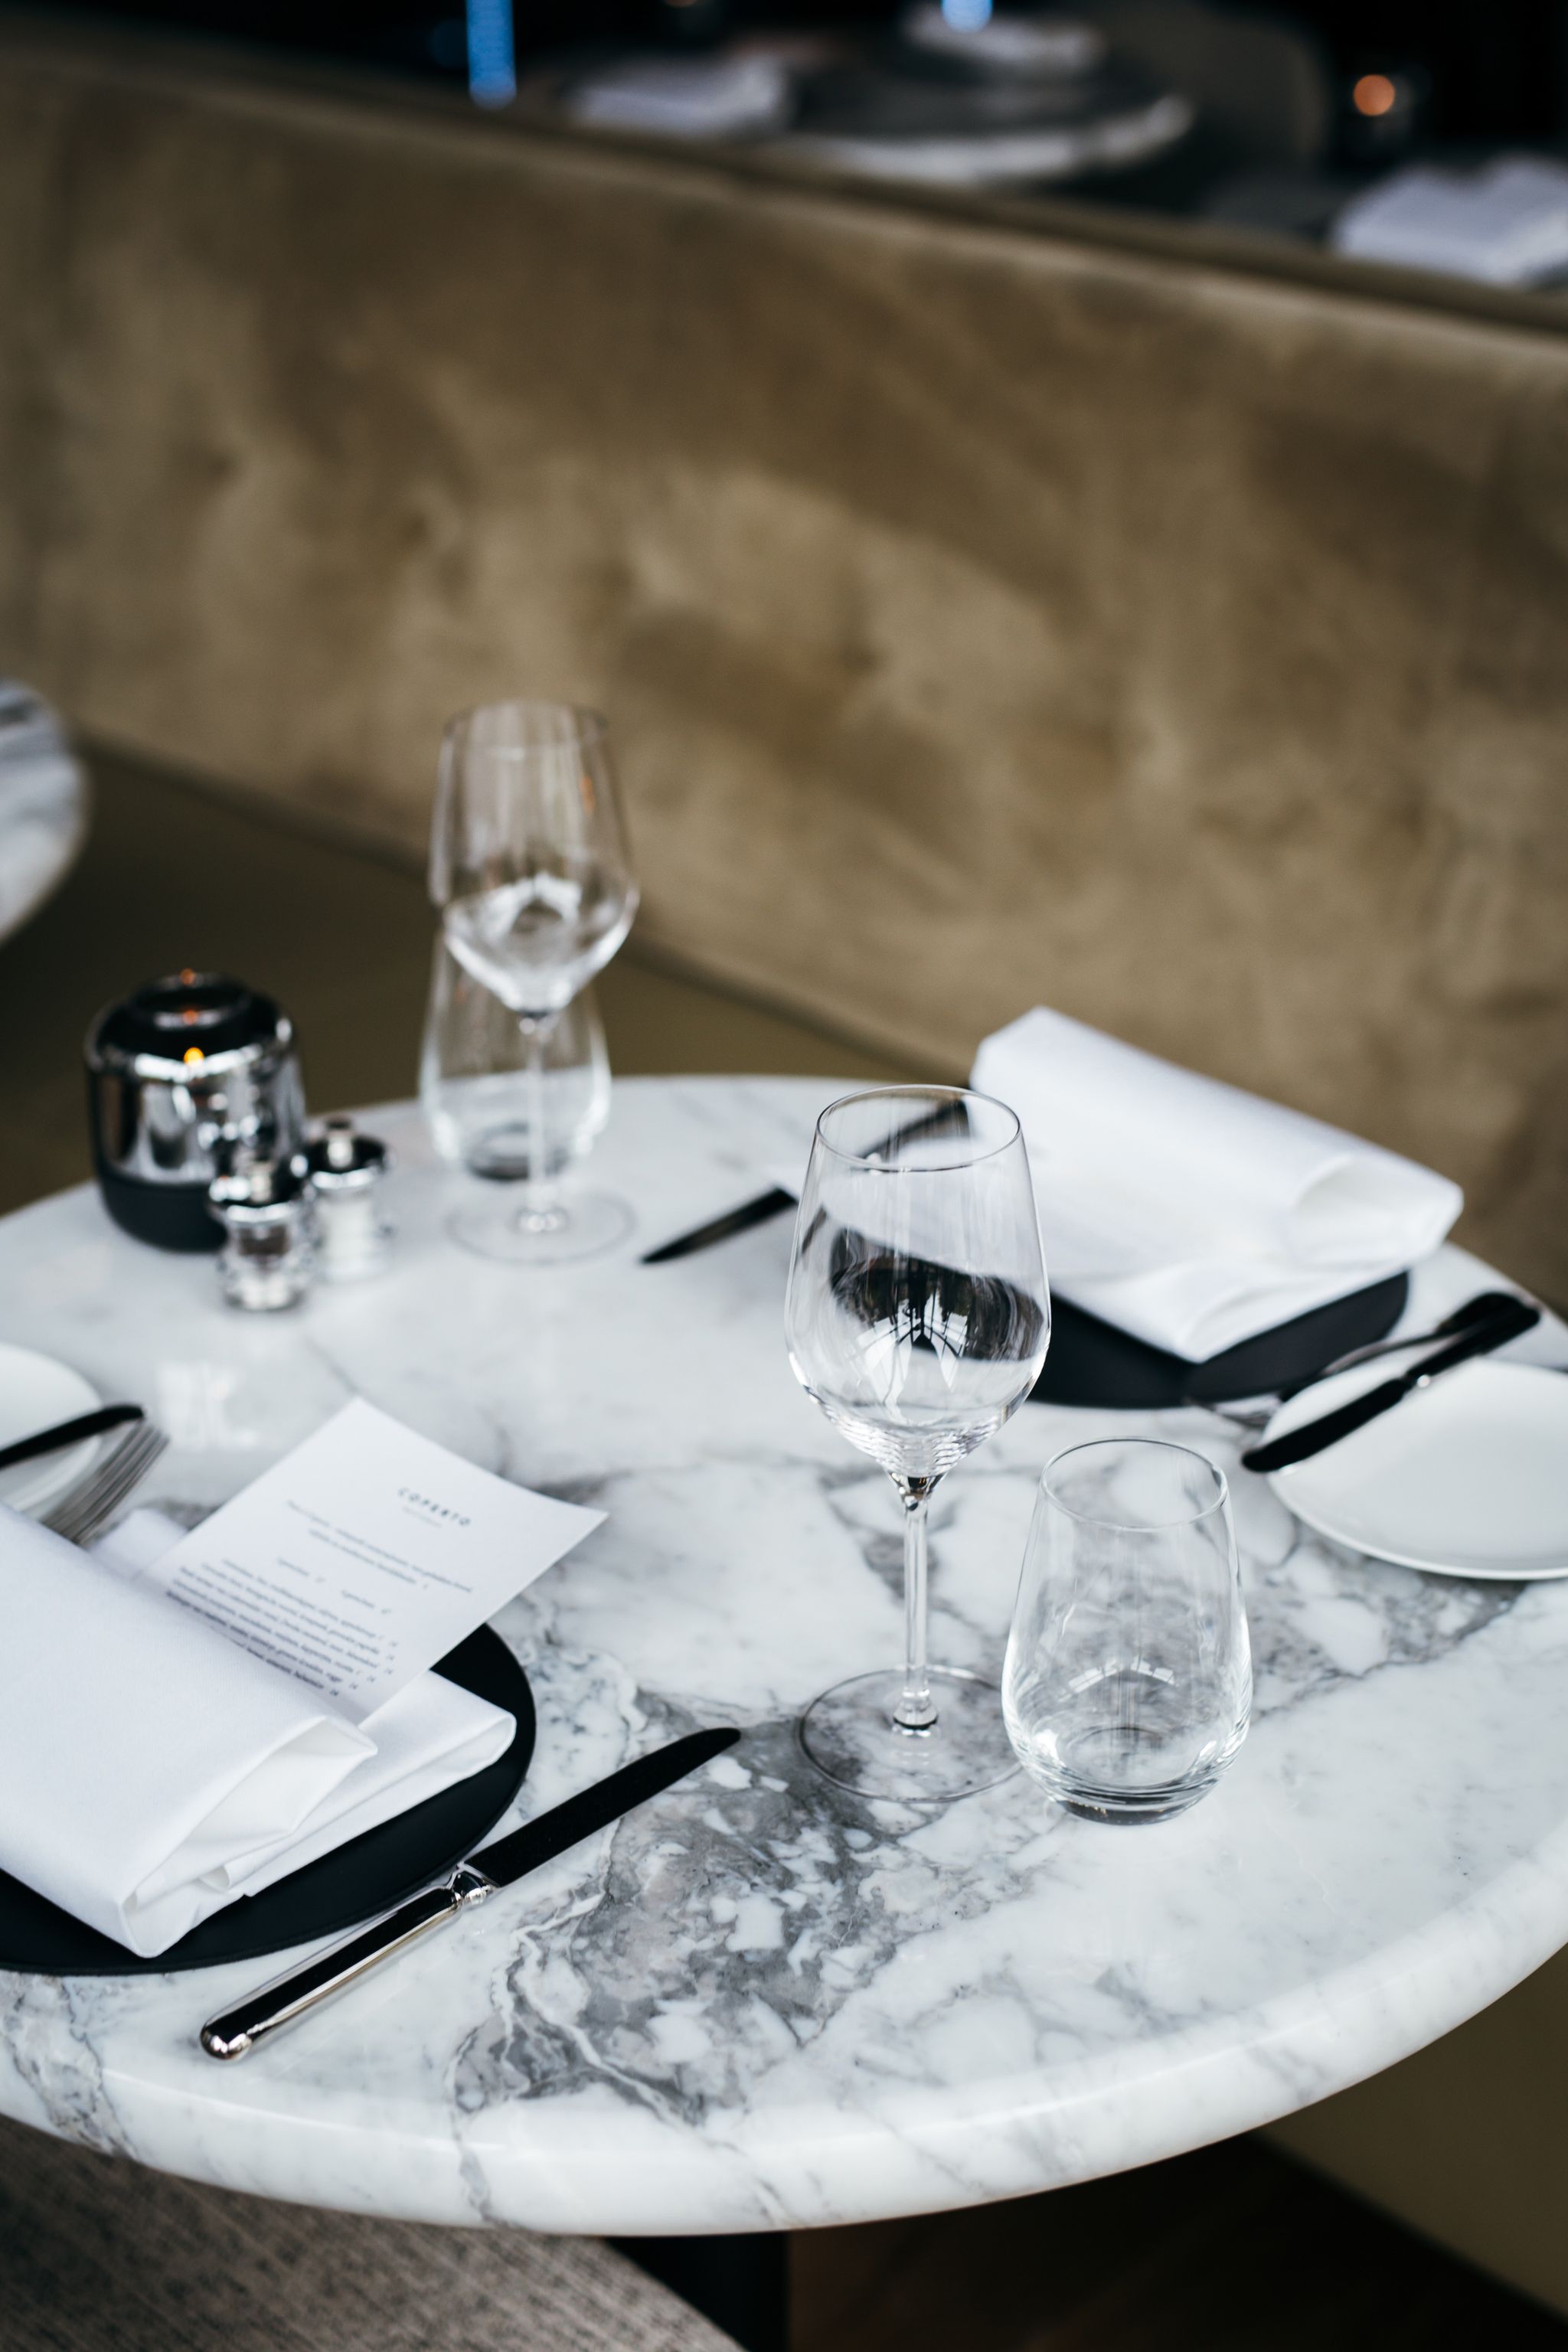 Table, Restaurant, Rehearsal dinner, Black-and-white, Tablecloth, Textile, Tableware, Photography, Glass, À la carte food, 